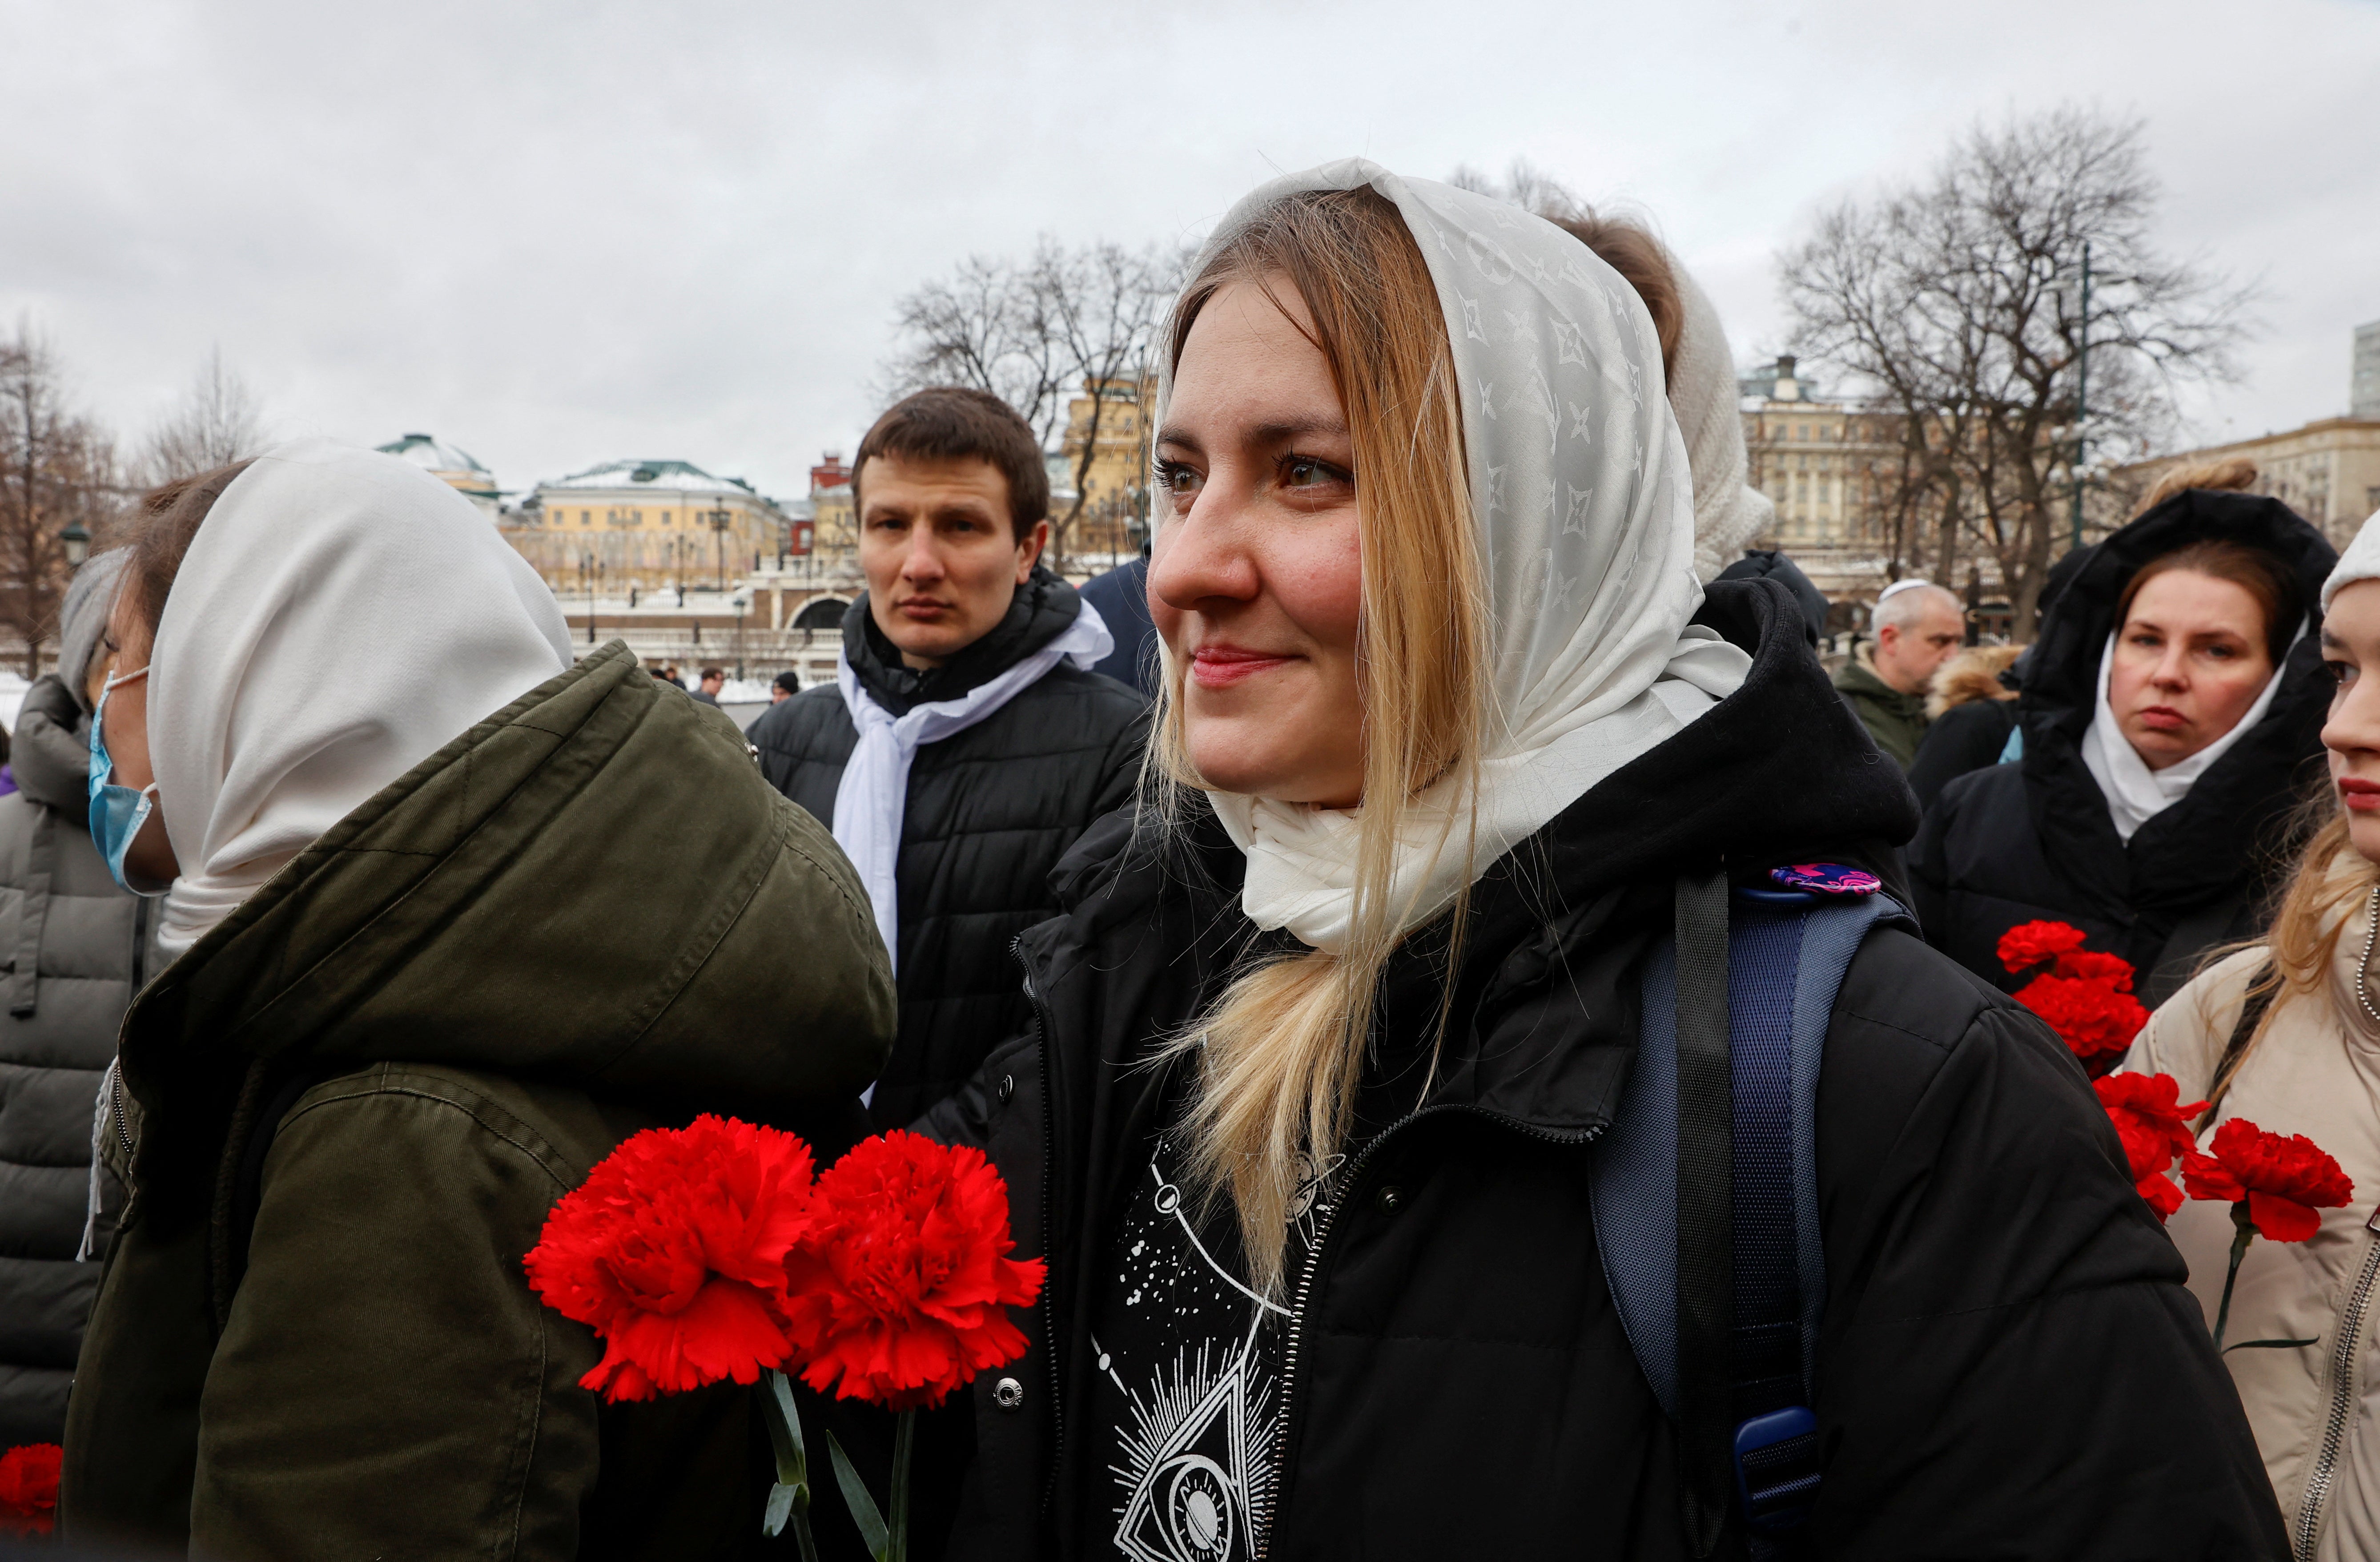 The relatives of servicemen gathered to lay flowers at the Tomb of the Unknown Soldier on Saturday